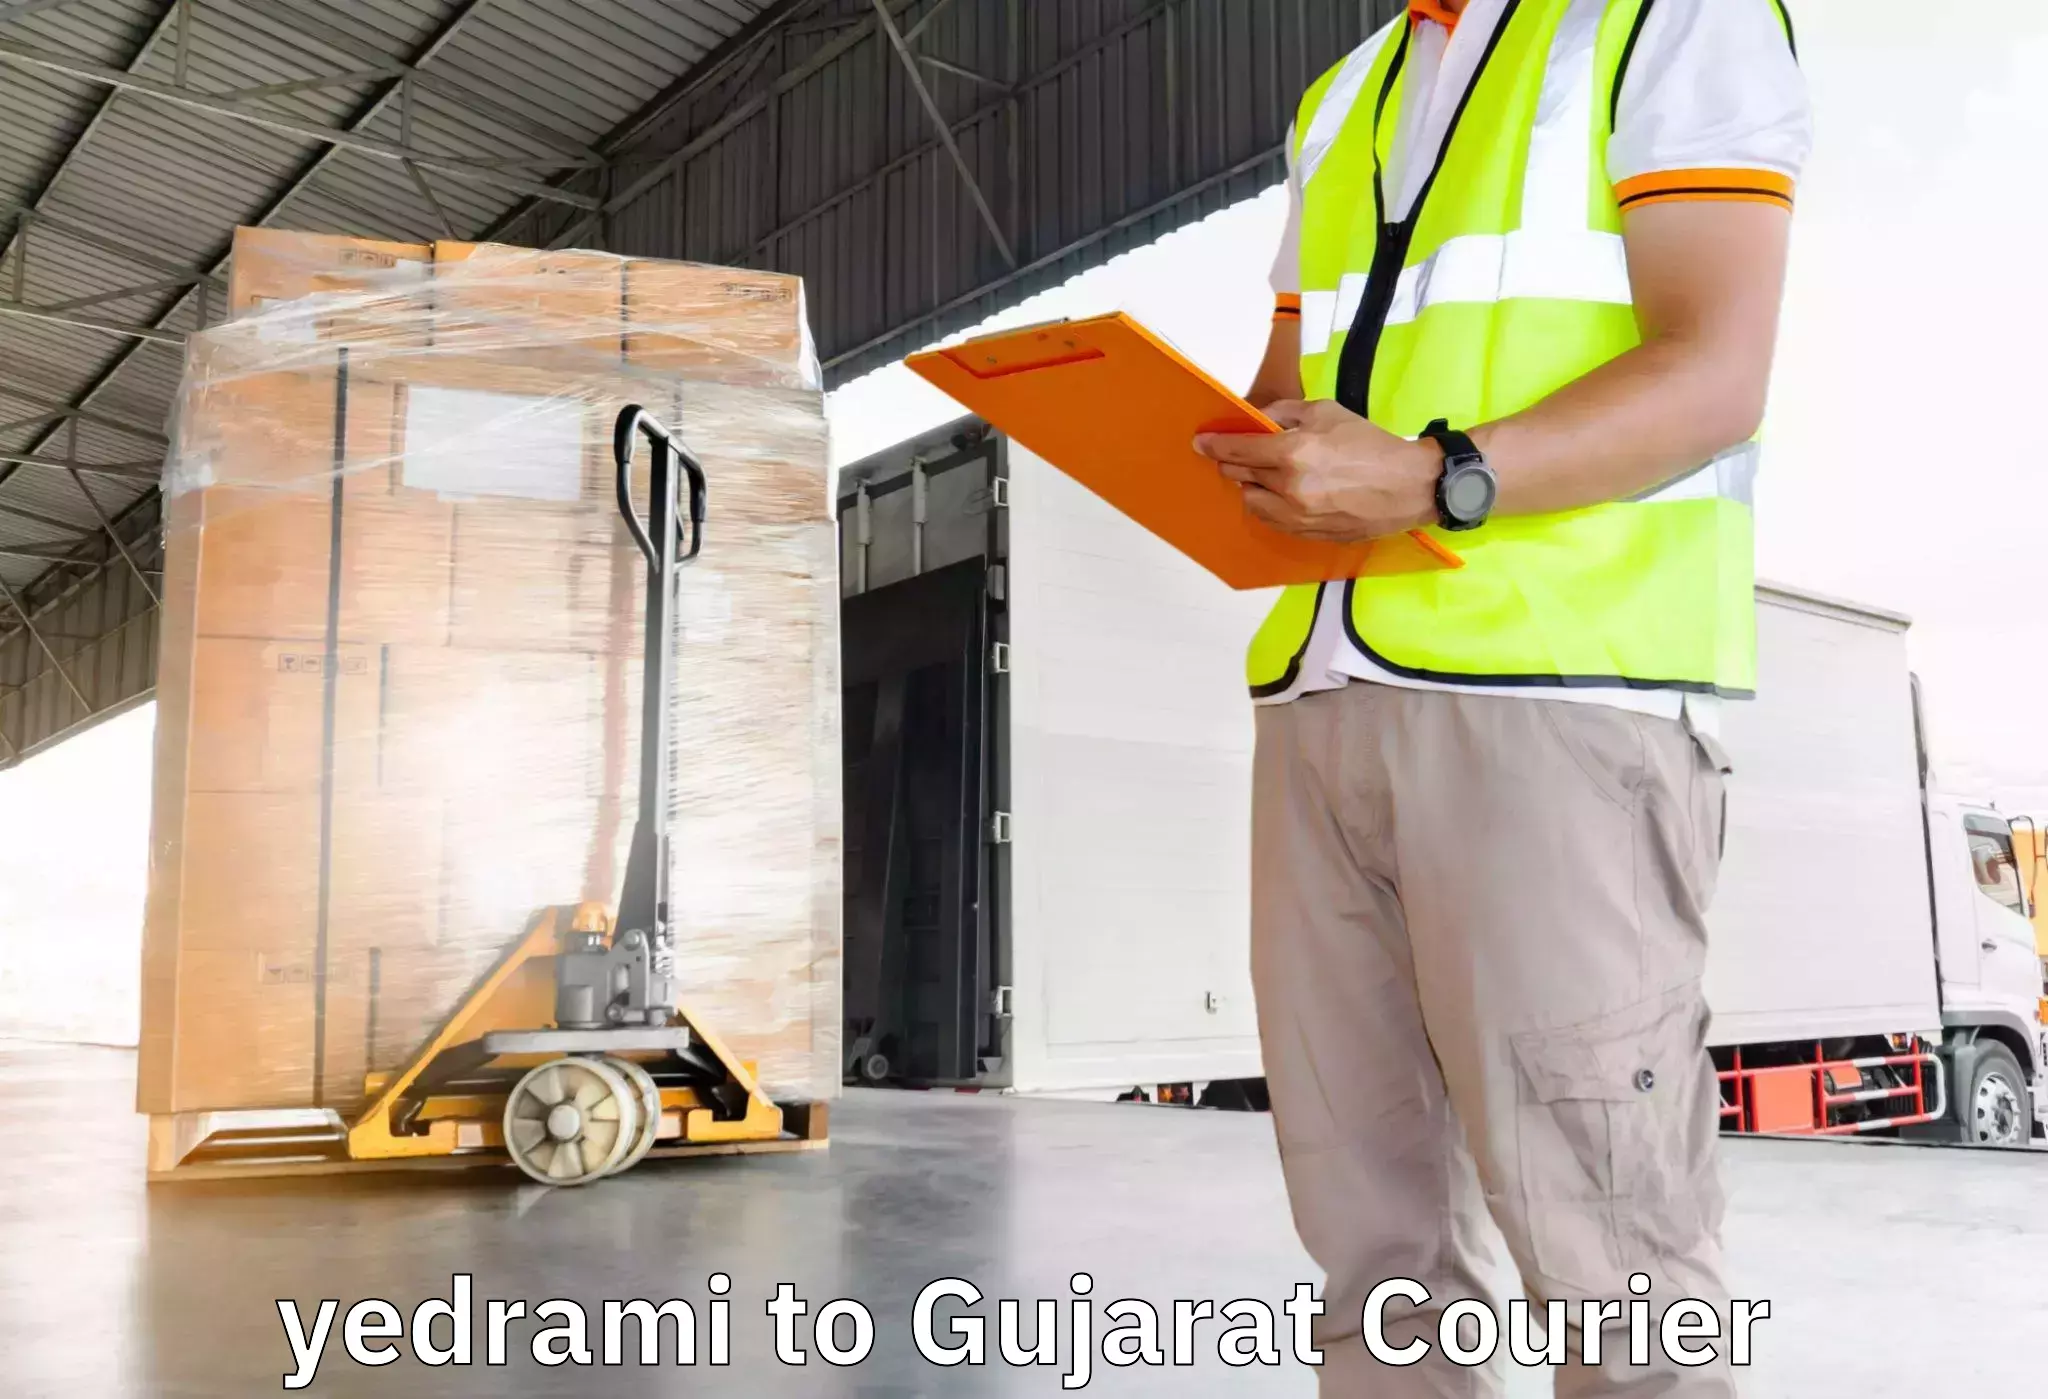 Affordable relocation services yedrami to Mandvi